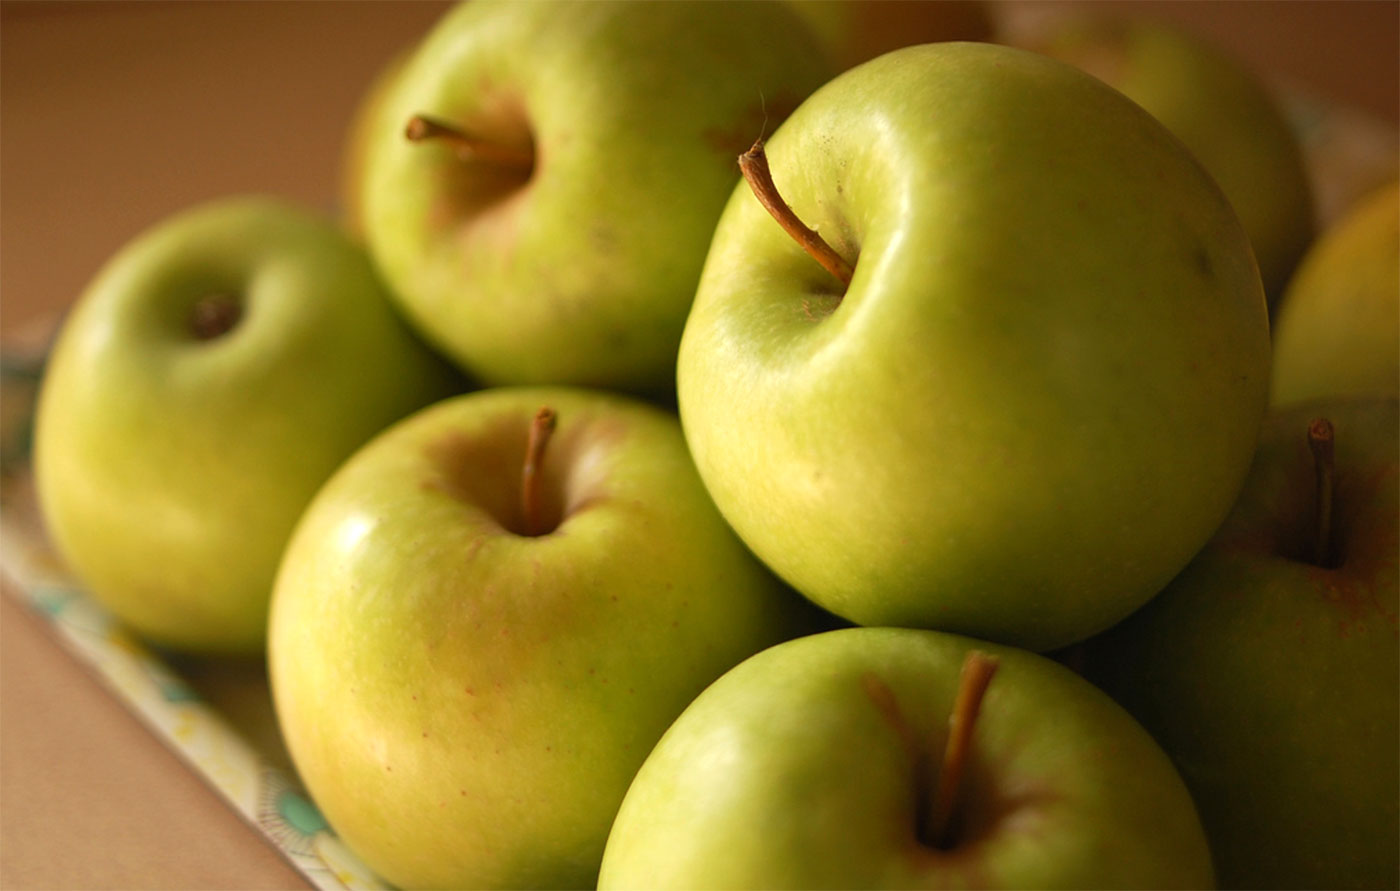 Buy the latest types of golden delicious apples